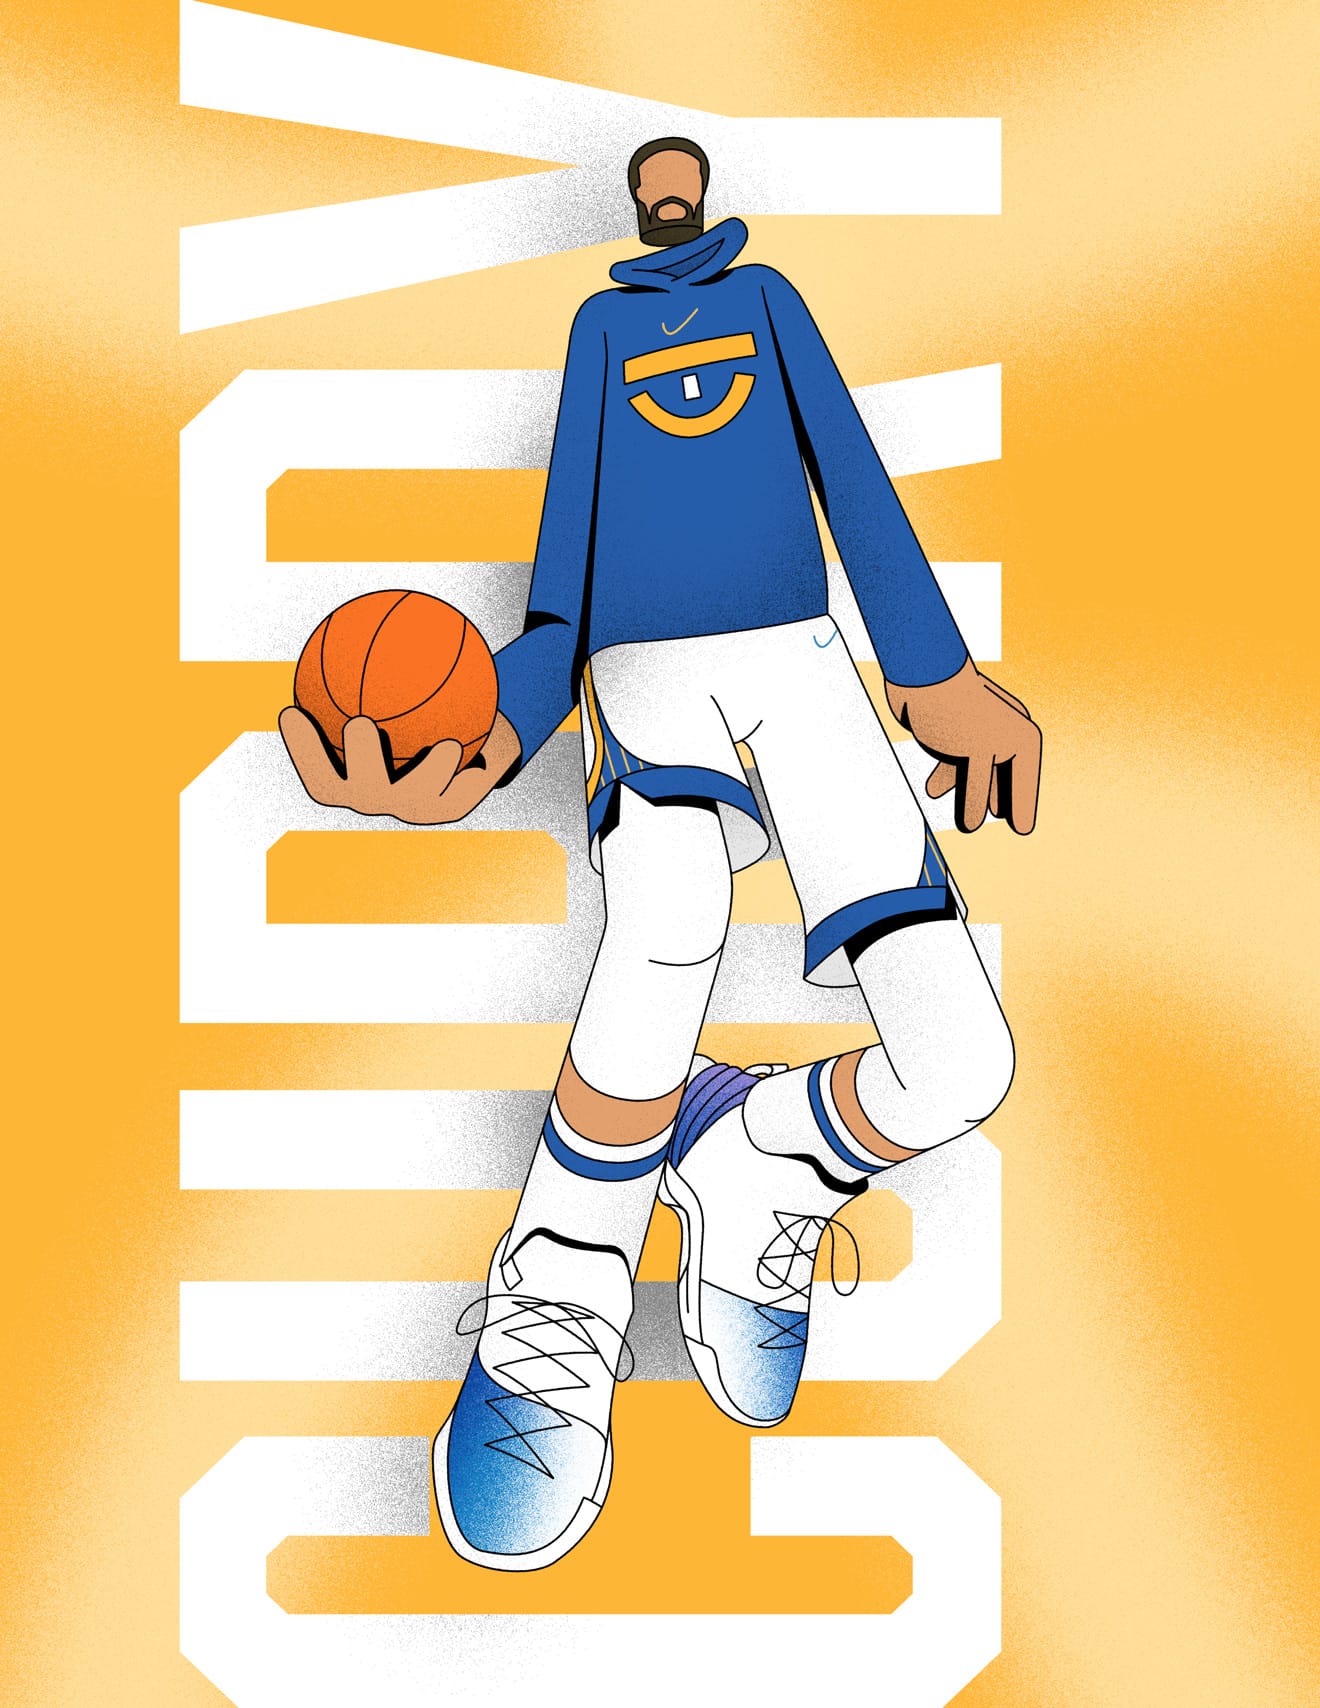 Illustration of basketball player, Steph Curry, mid-dunk